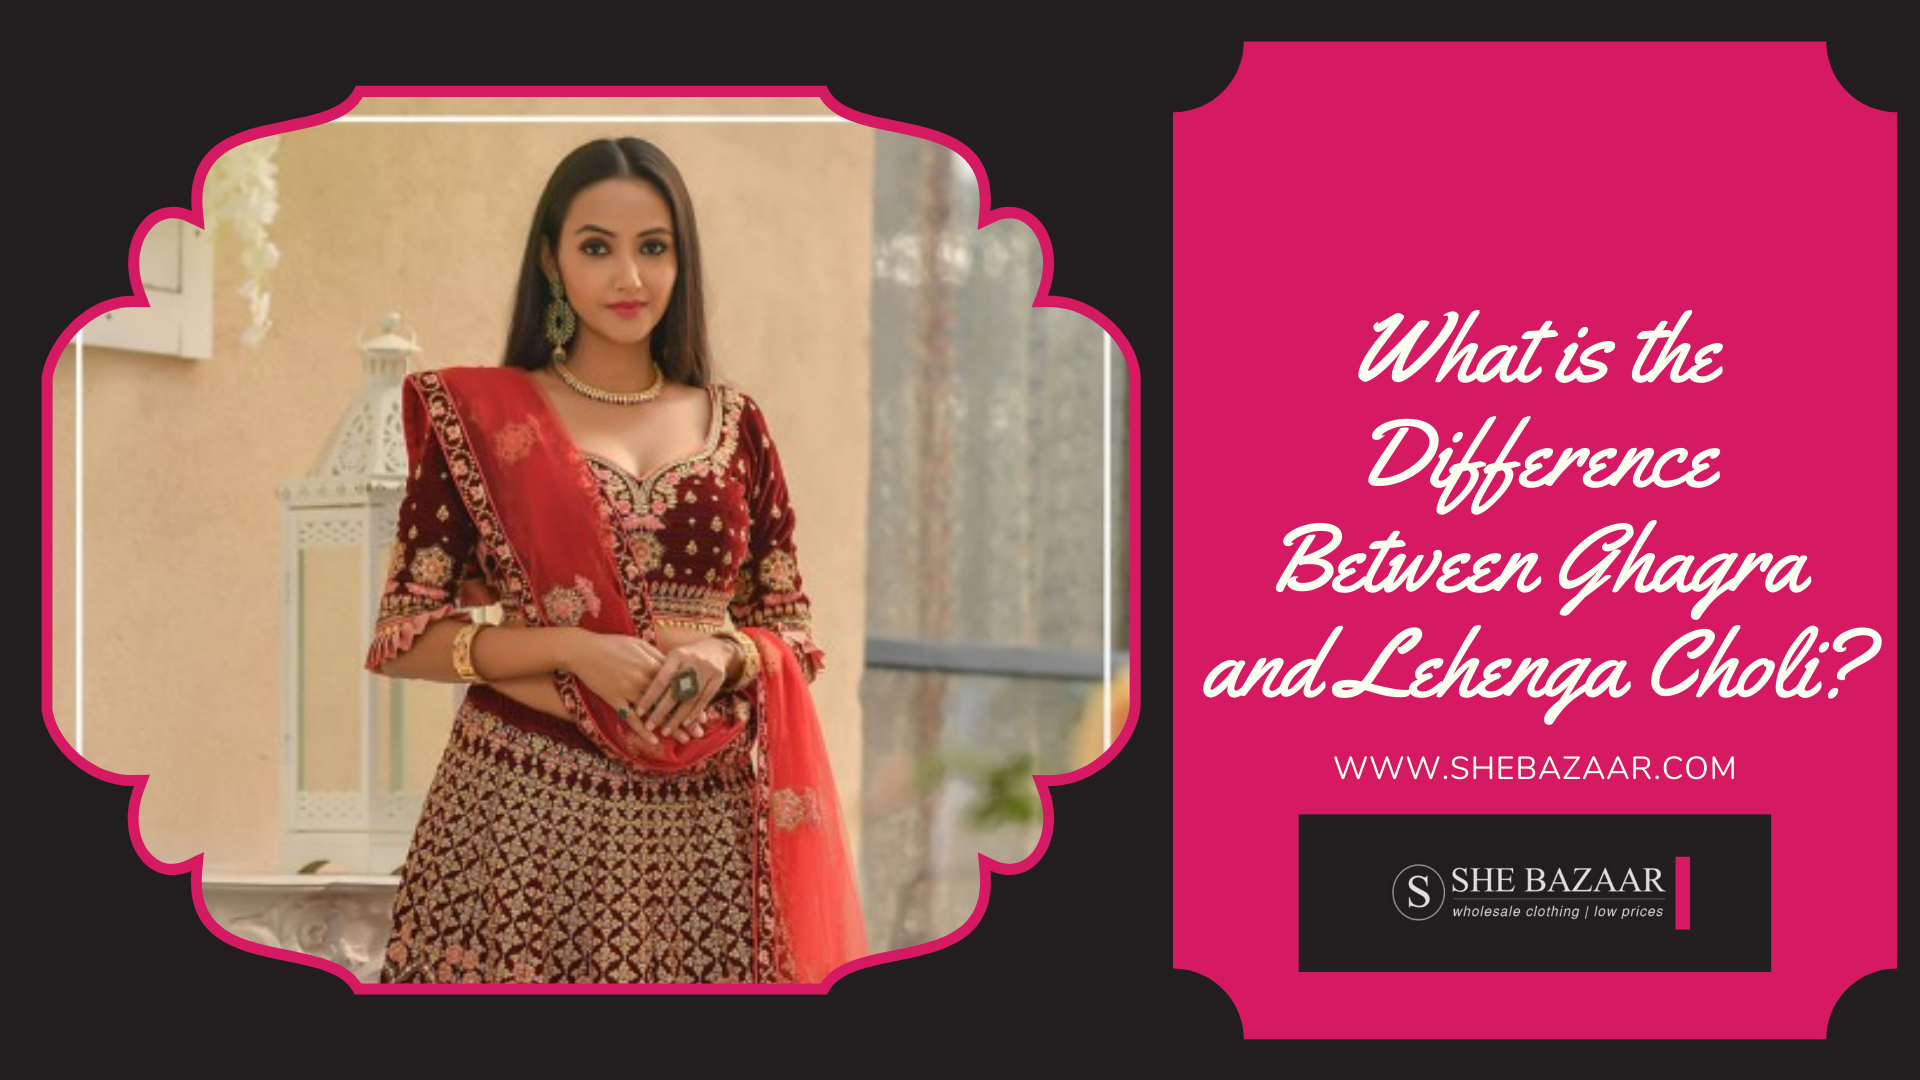 What is the Difference Between Ghagra and Lehenga Choli?